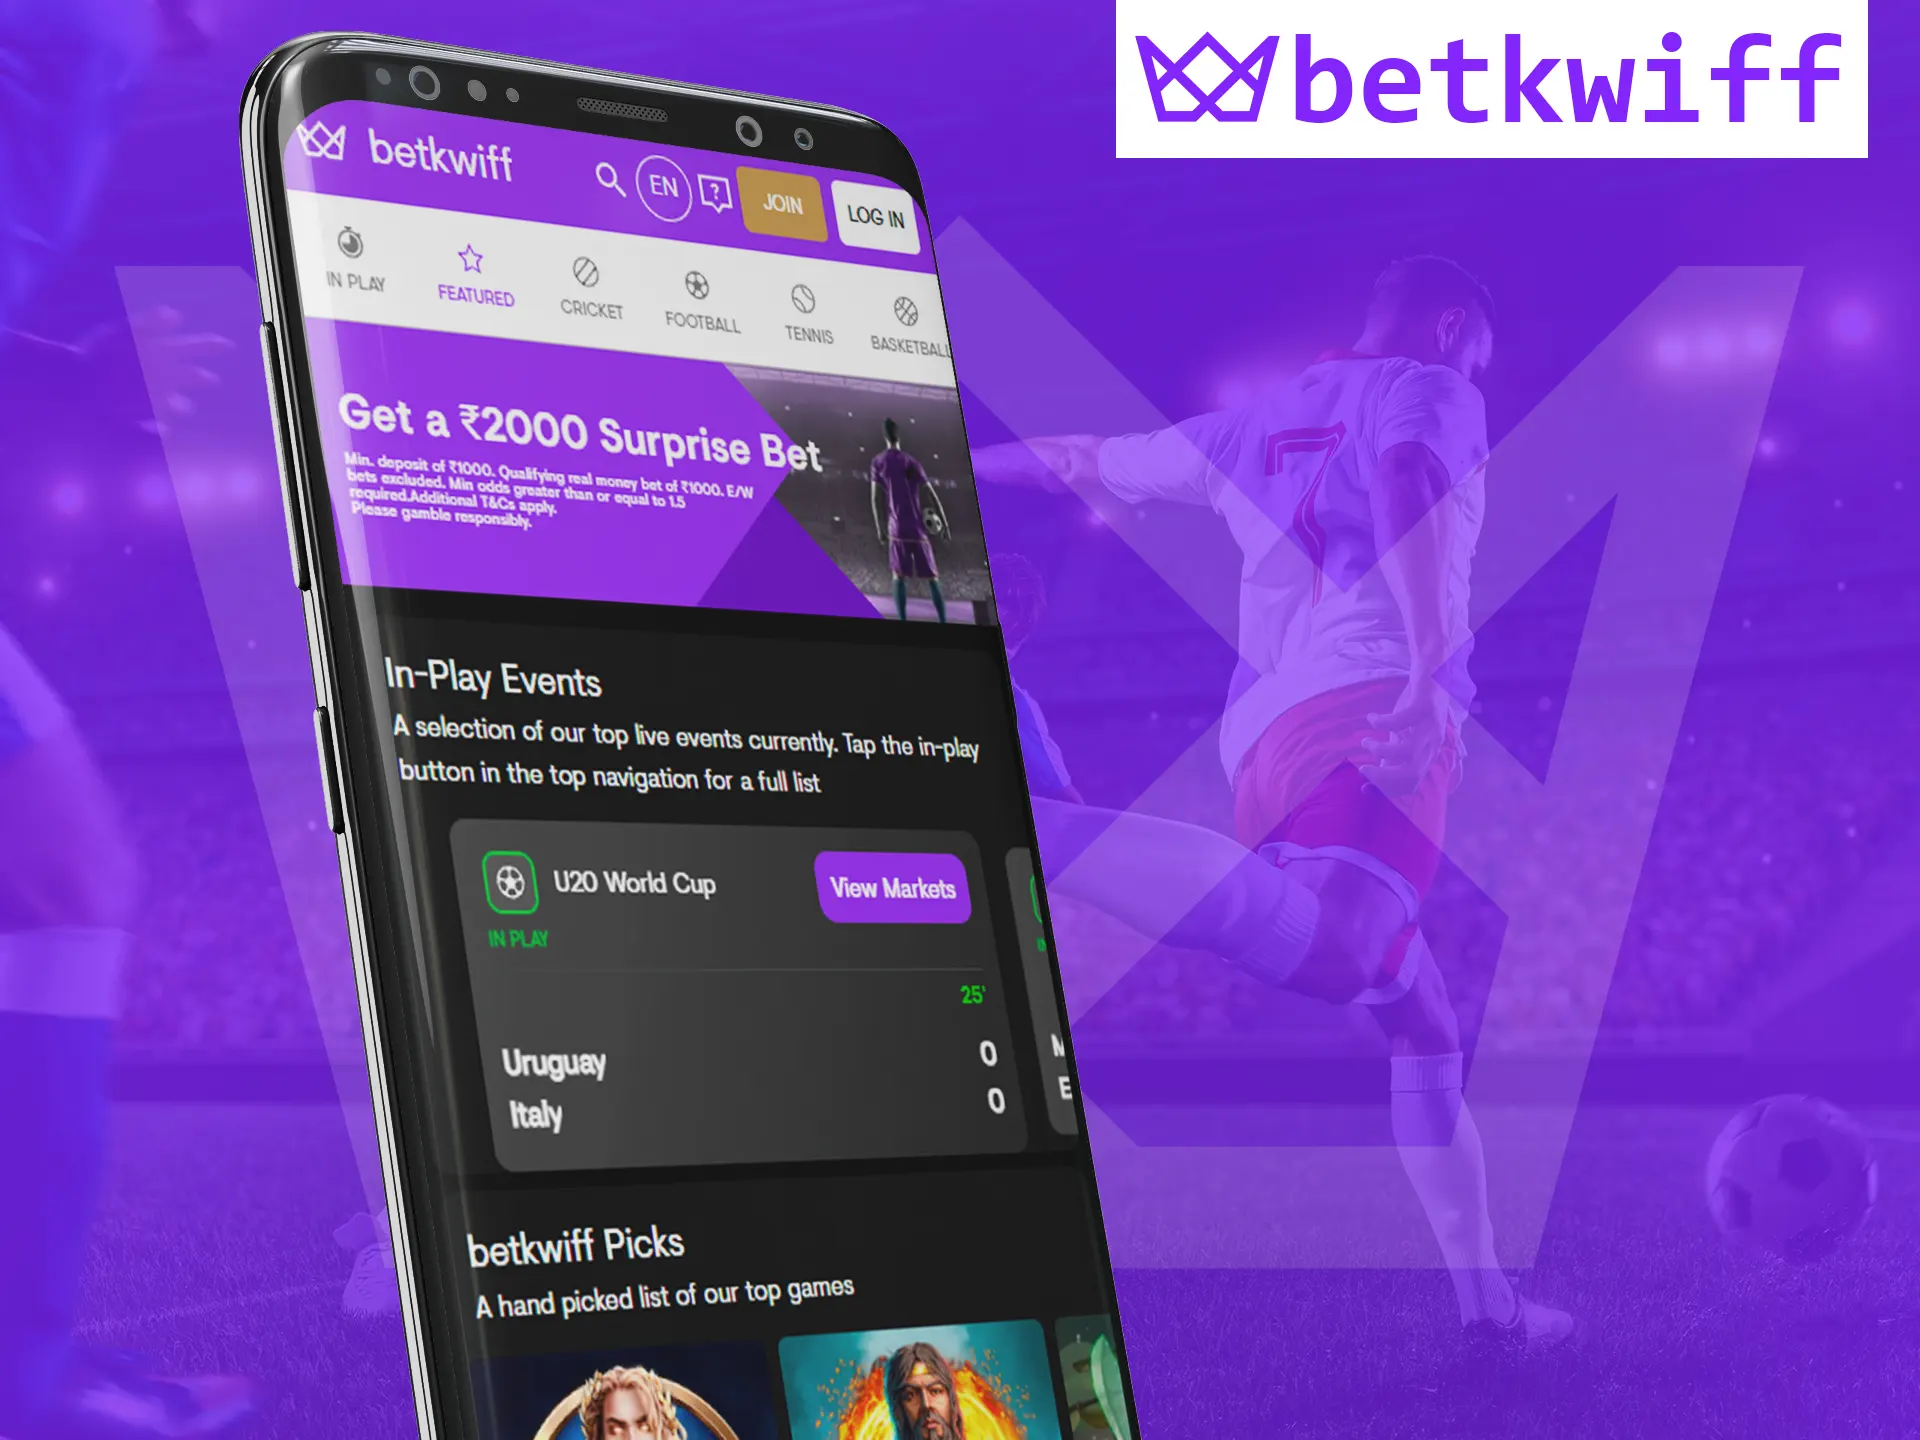 Visit the official mobile site of the Betkwiff.